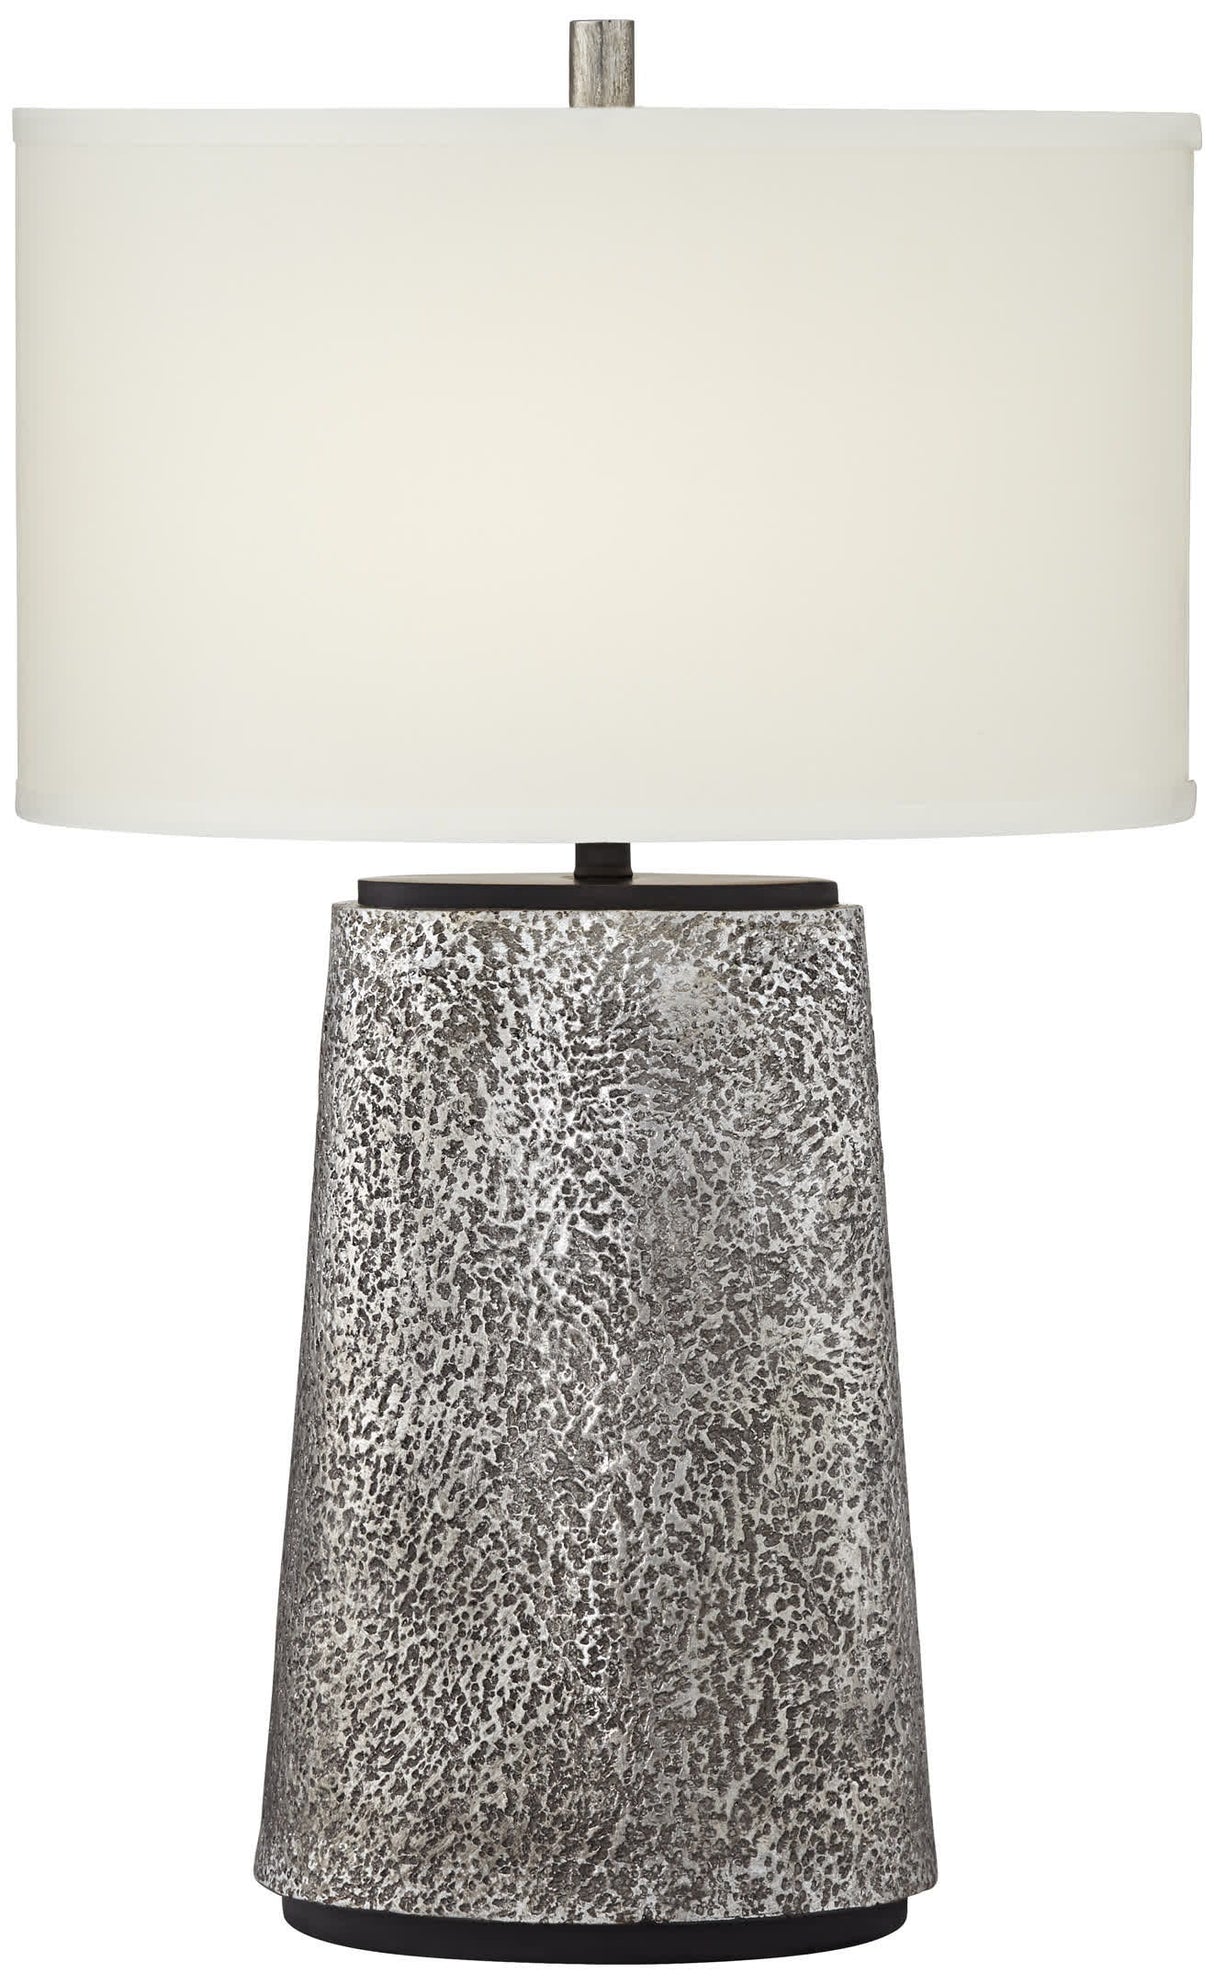 Palo Alto - Table Lamp - Aged Pewter